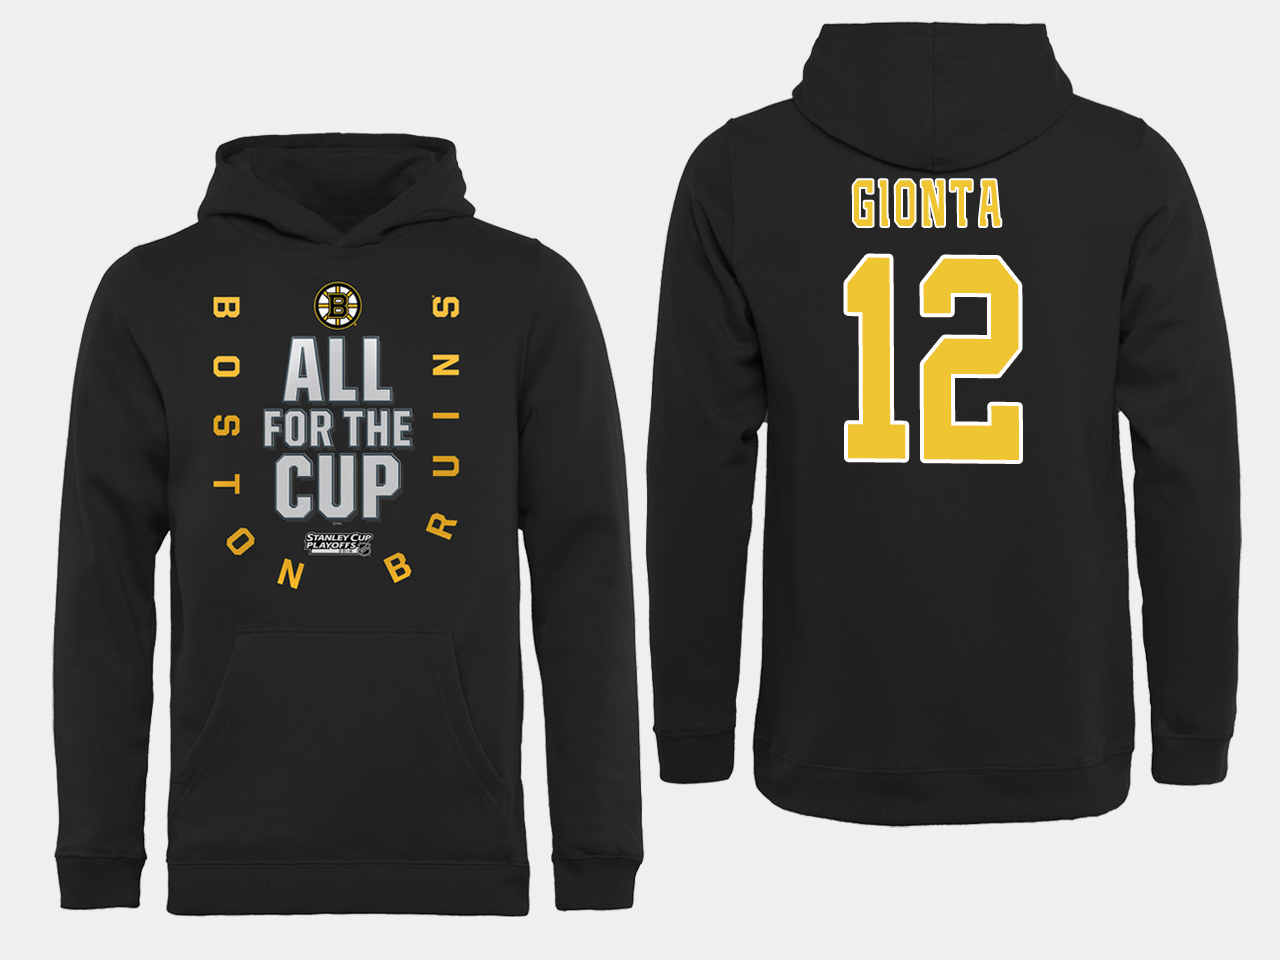 NHL Men Boston Bruins 12 Gionta Black All for the Cup Hoodie